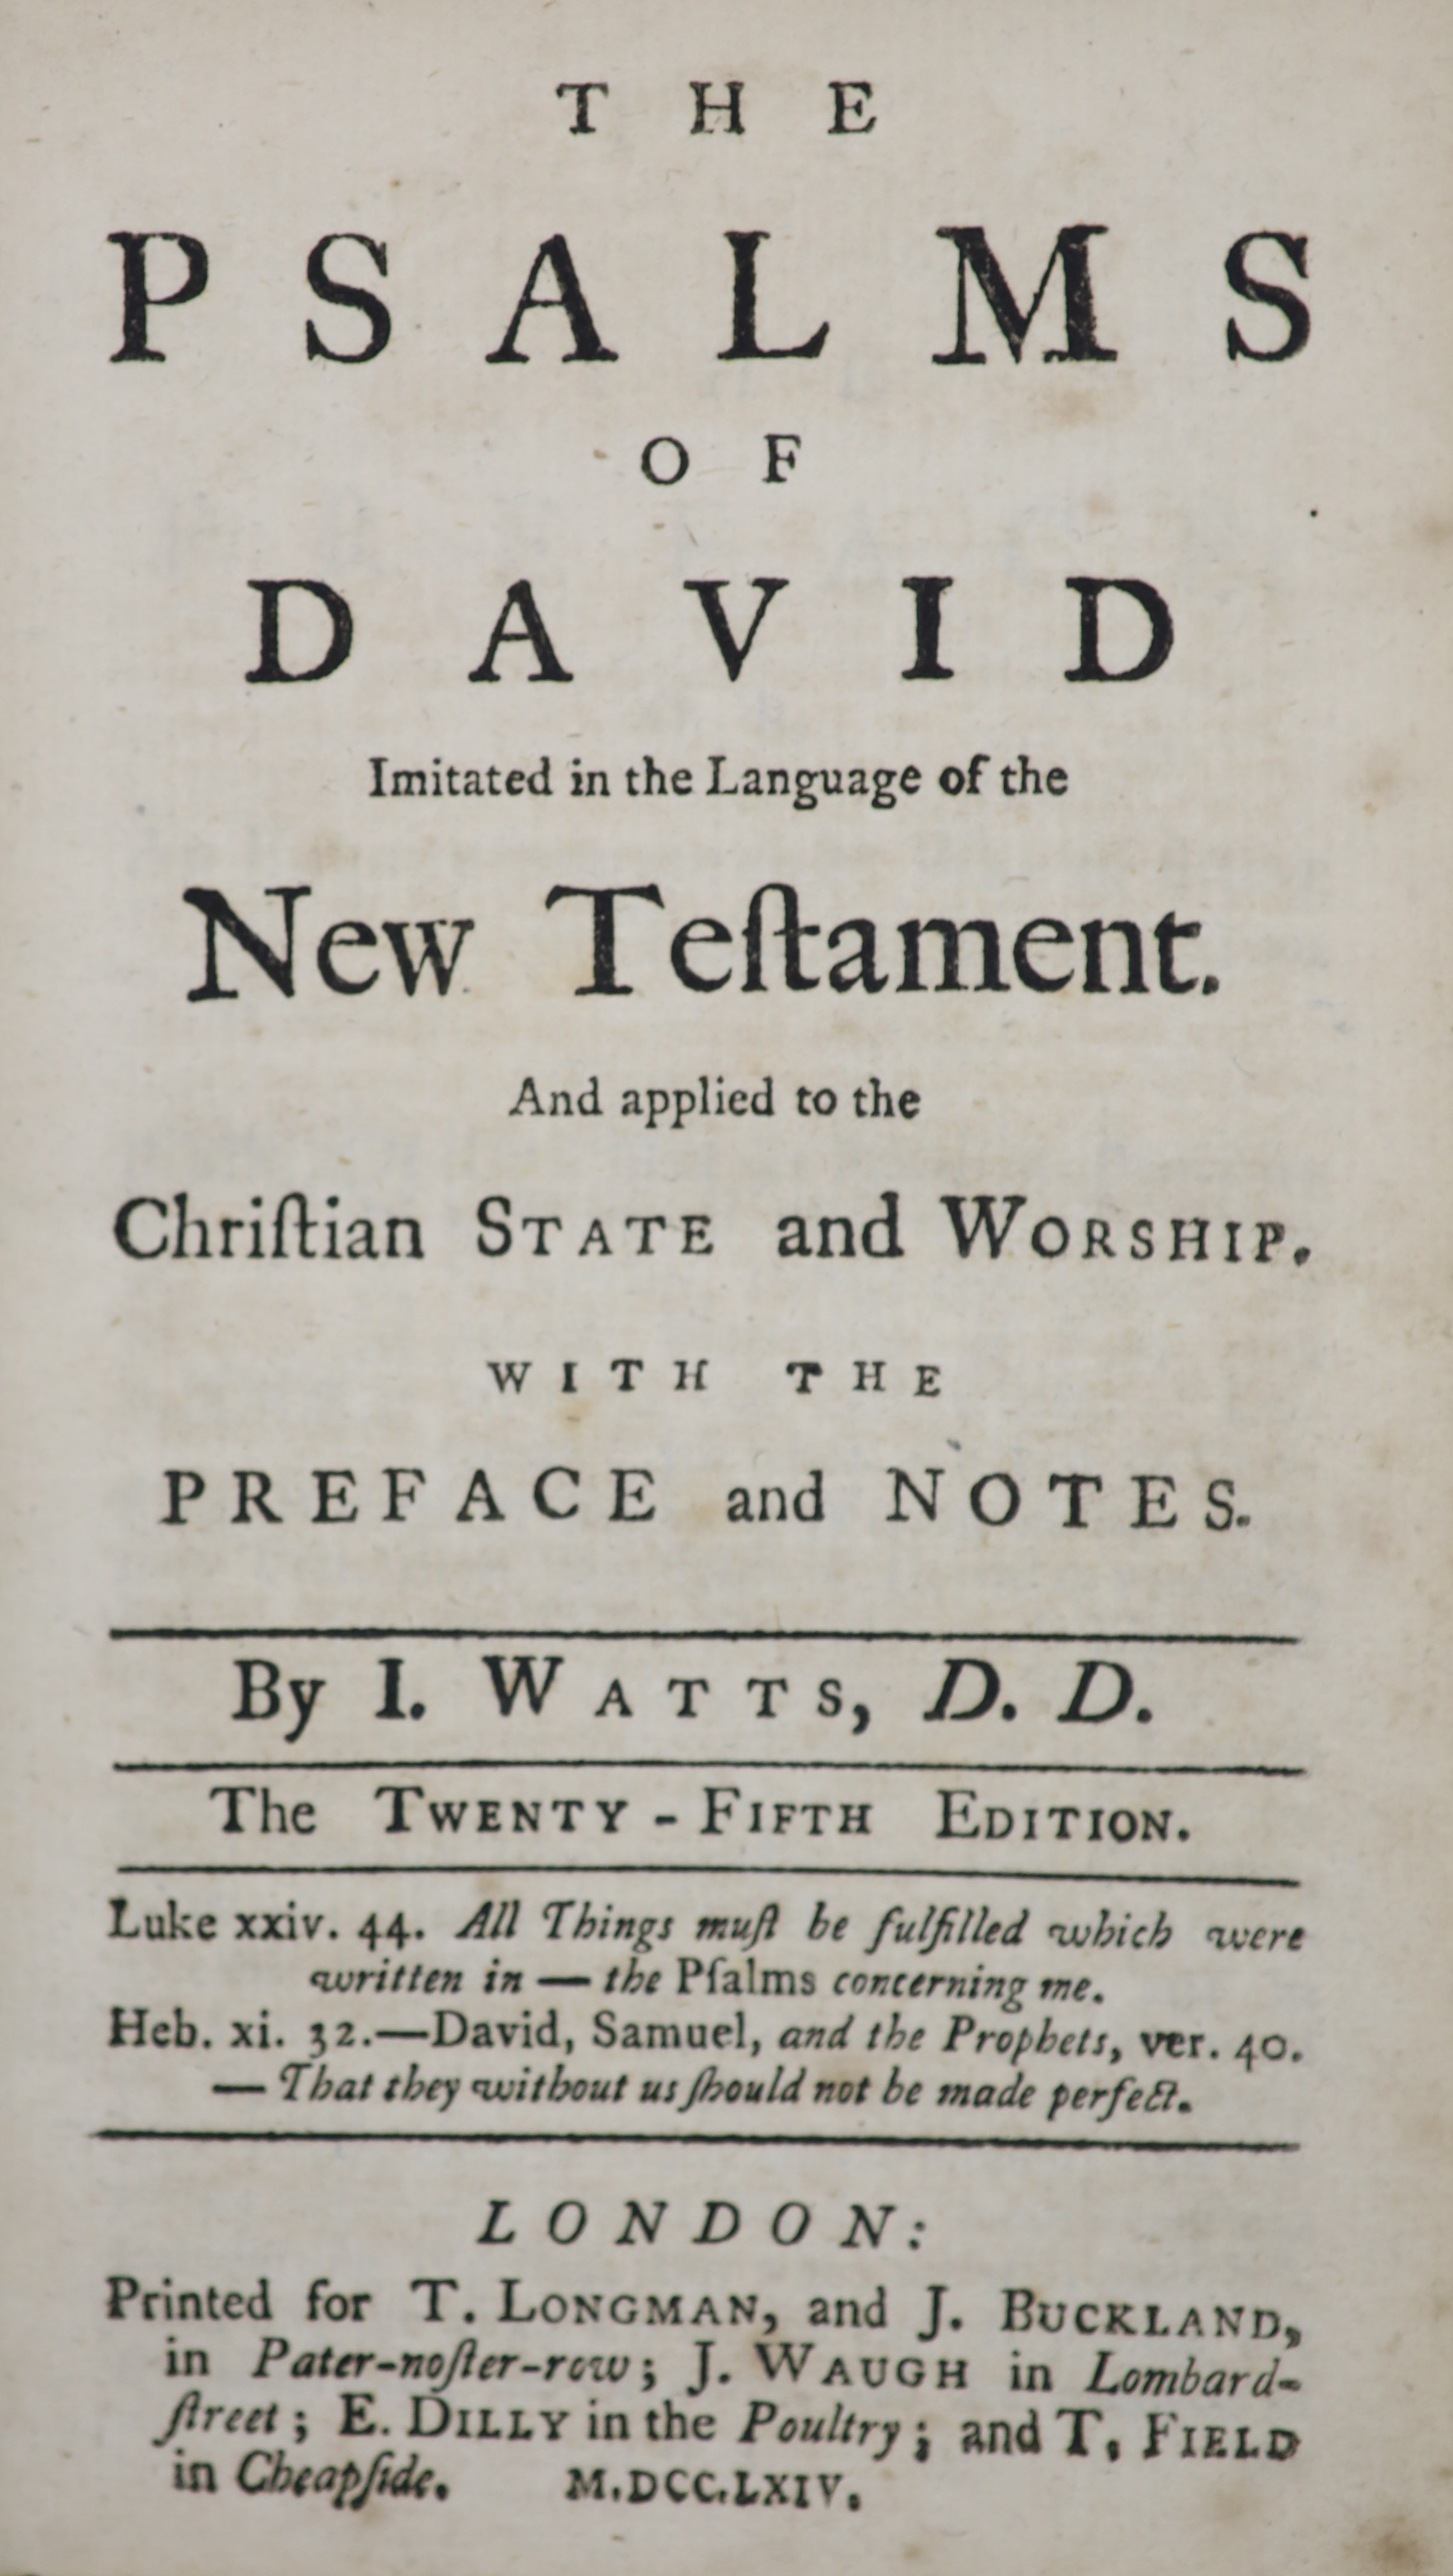 Wheatley, Charles - The Church of England Man's Companion.... 2nd edition, with large additions. engraved frontis., modern morocco backed cloth. Oxford, 1714; Barclay, Robert - An Apology for the True Christian Divinity.